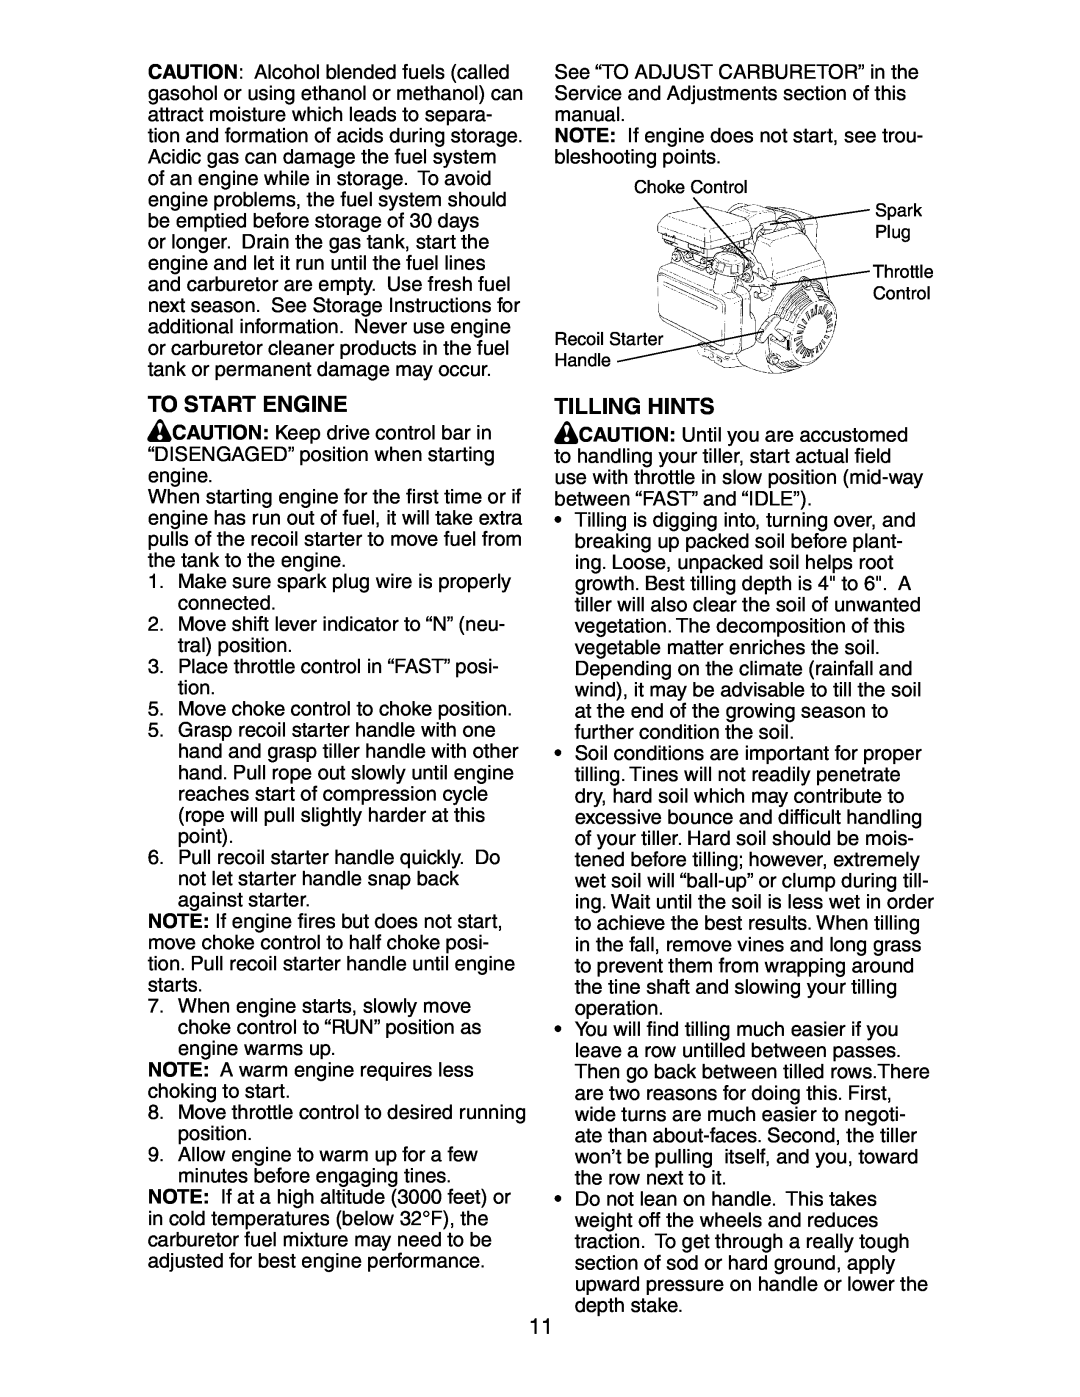 Sears 917.29425 owner manual To Start Engine, Tilling Hints 